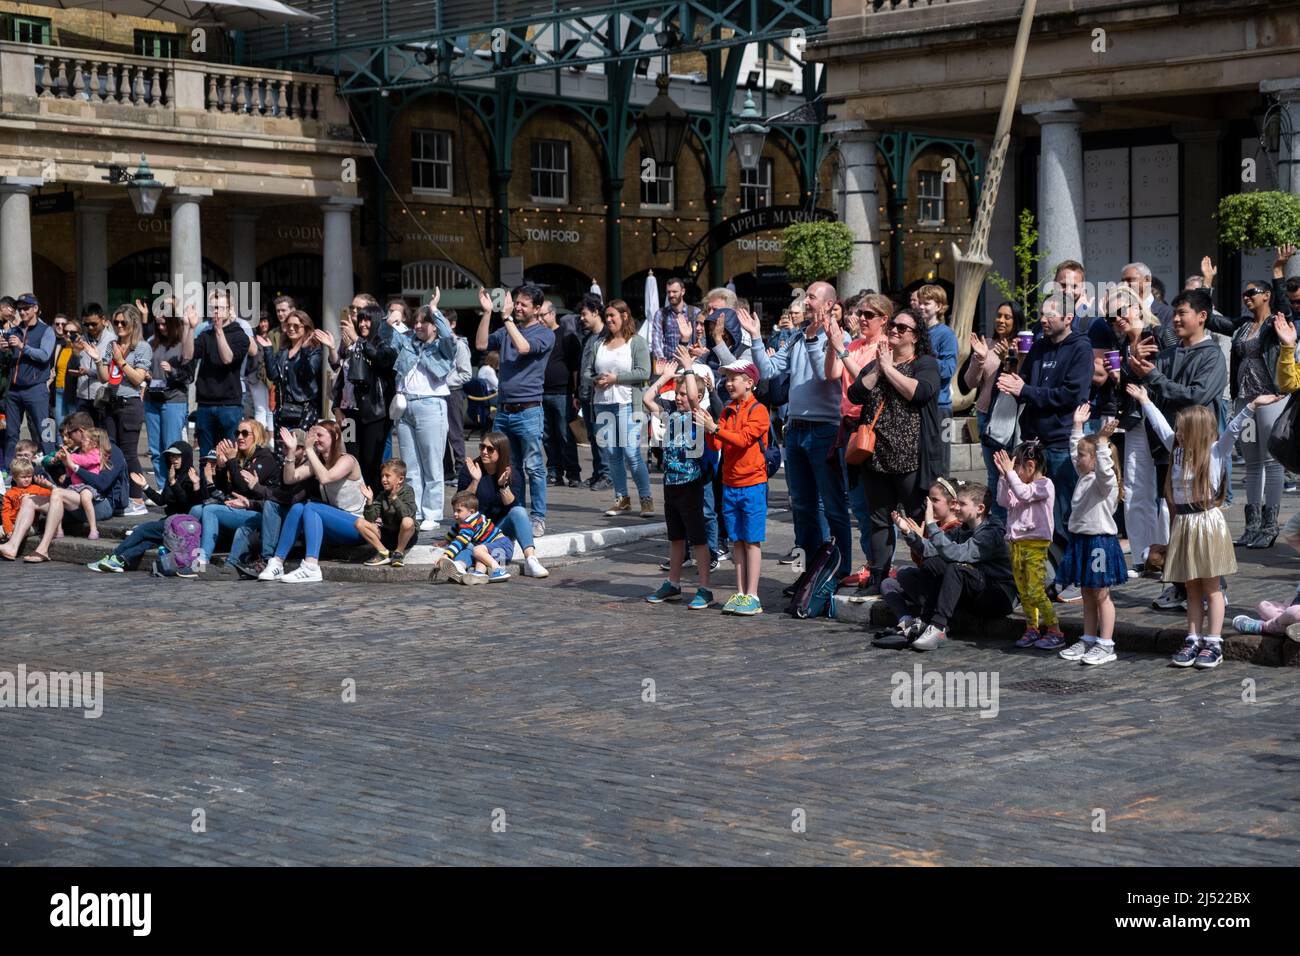 Street performers in Covent Garden, London. Stock Photo